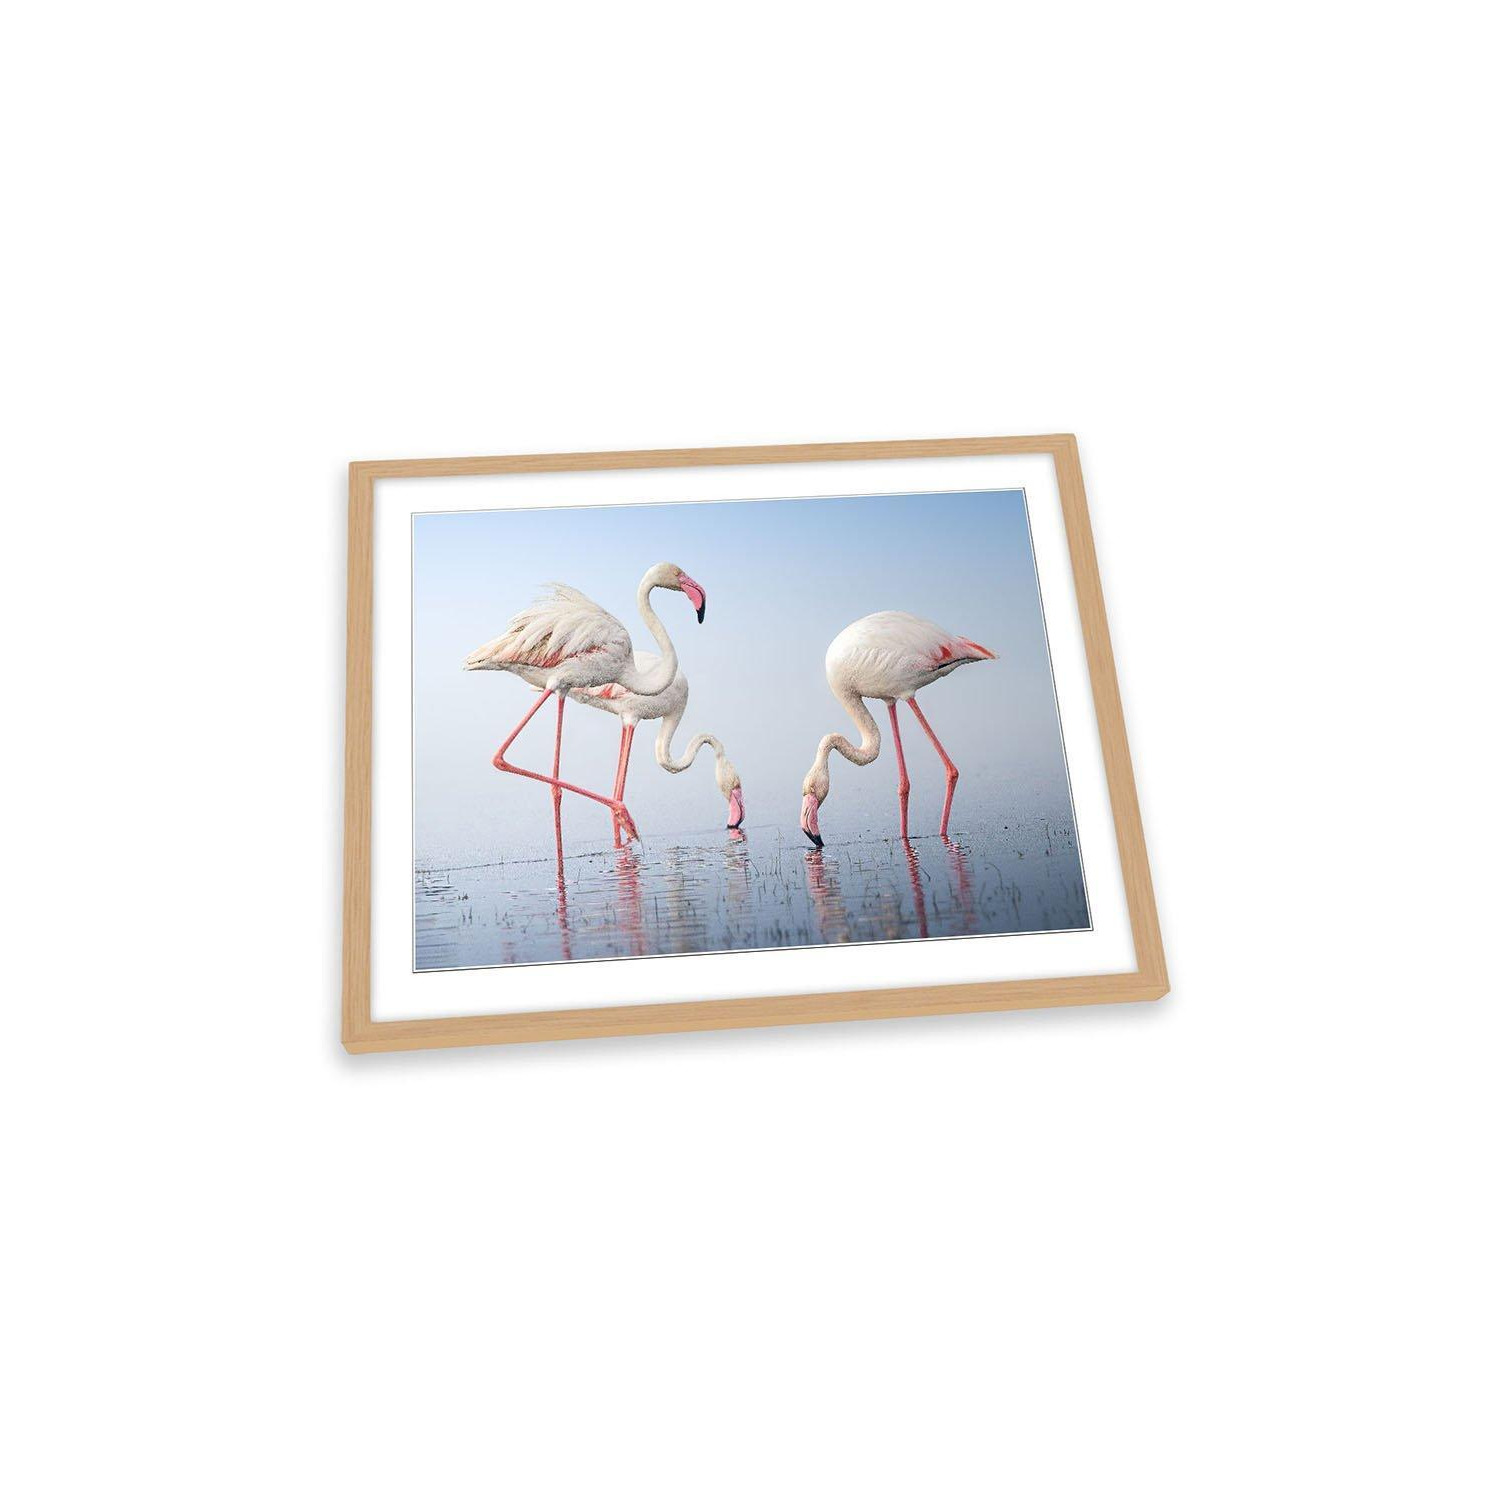 Pink Flamingos Birds Water Framed Art Print Picture Wall Artwork - (W)89cm x (H)64cm - image 1